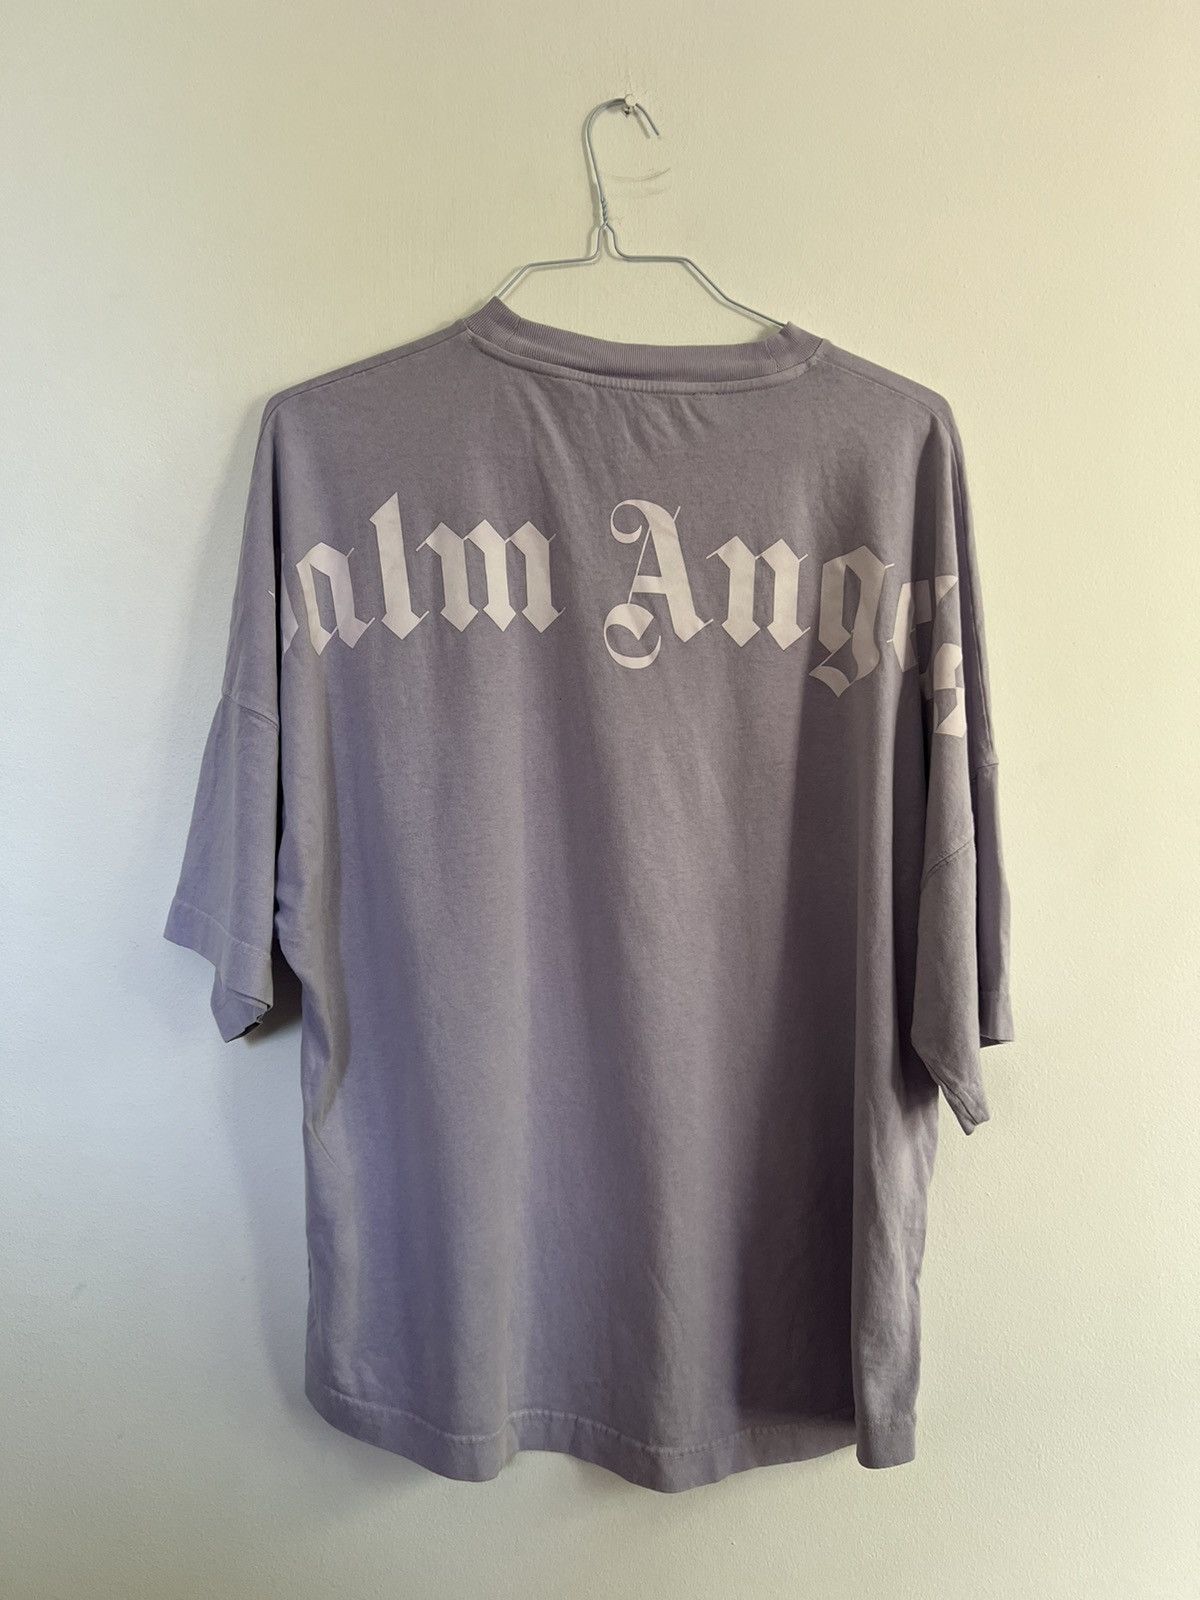 CLASSIC LOGO OVER T-SHIRT in grey - Palm Angels® Official